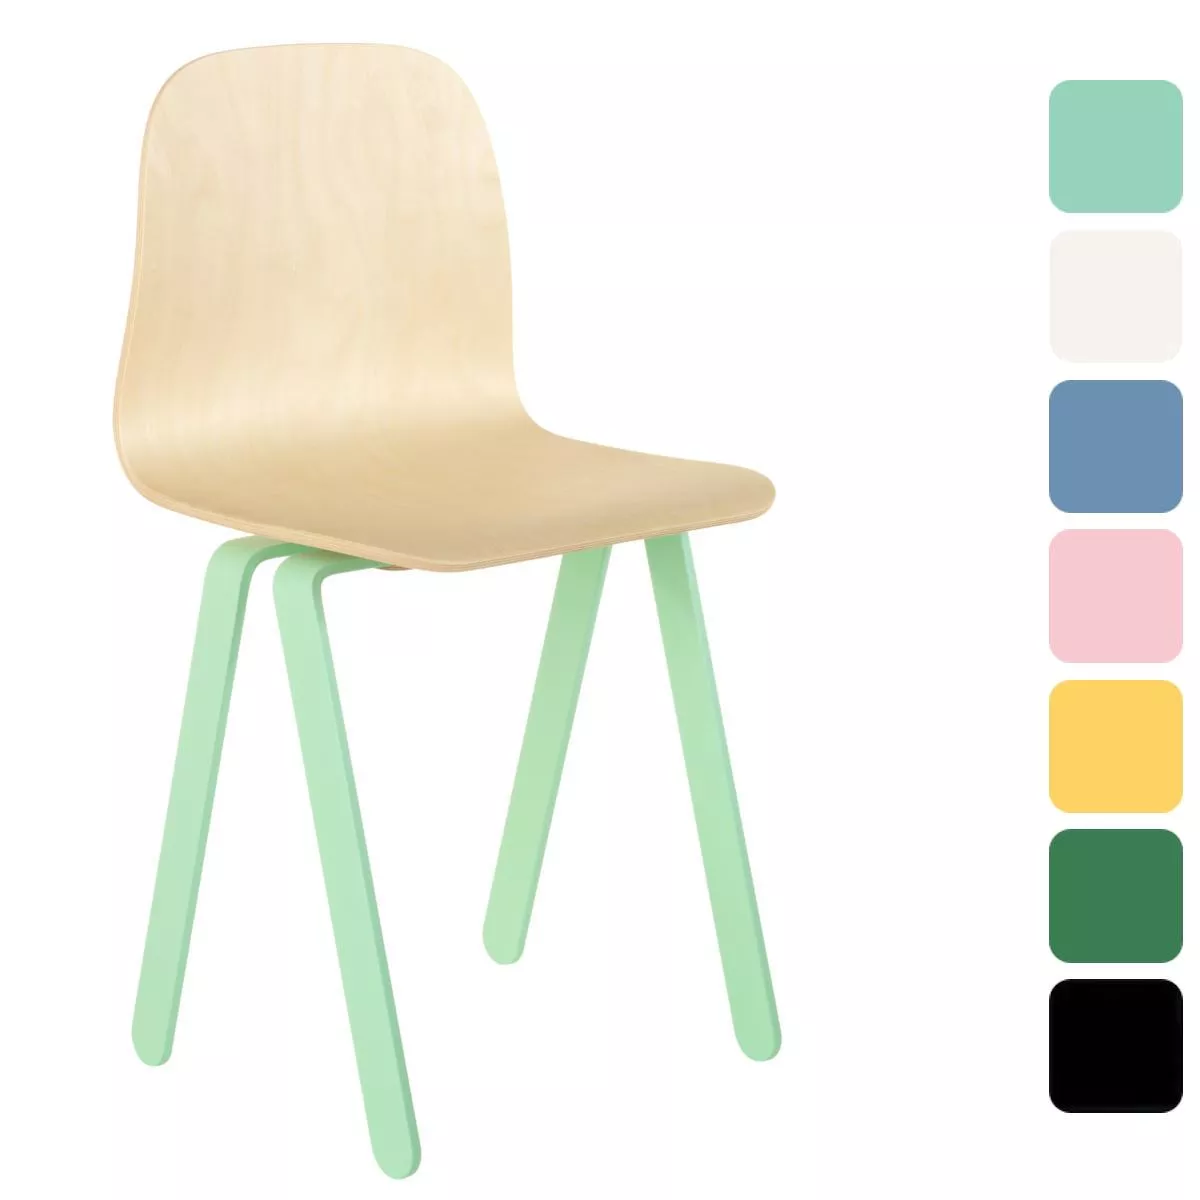 Large oldschool children's chair in various colors